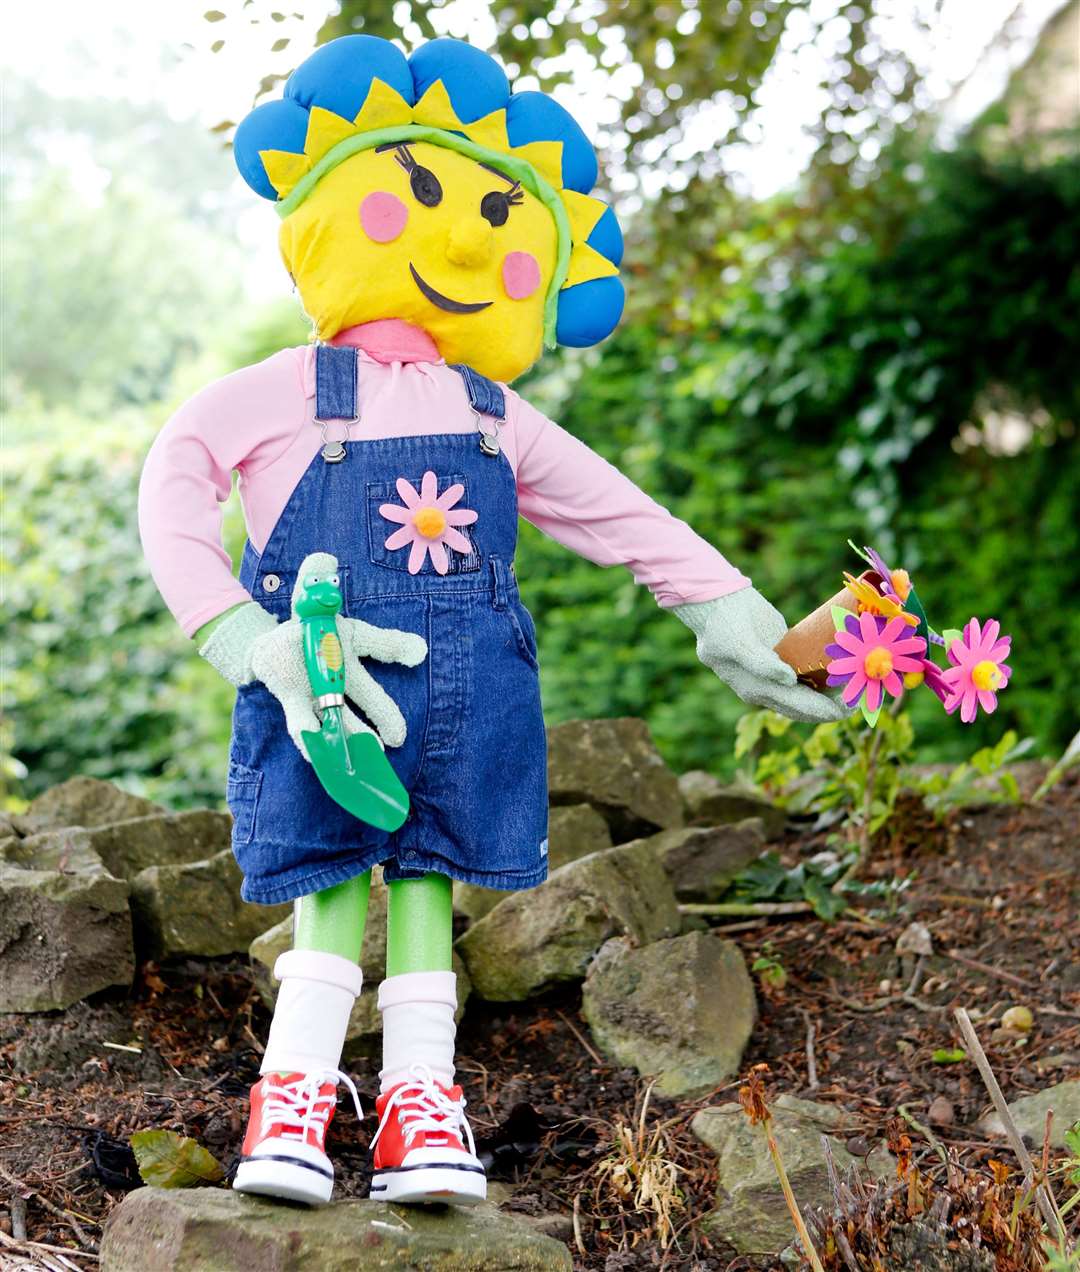 Fifi the scarecrow in the Loos Scarecrow Festival Picture: Matthew Walker